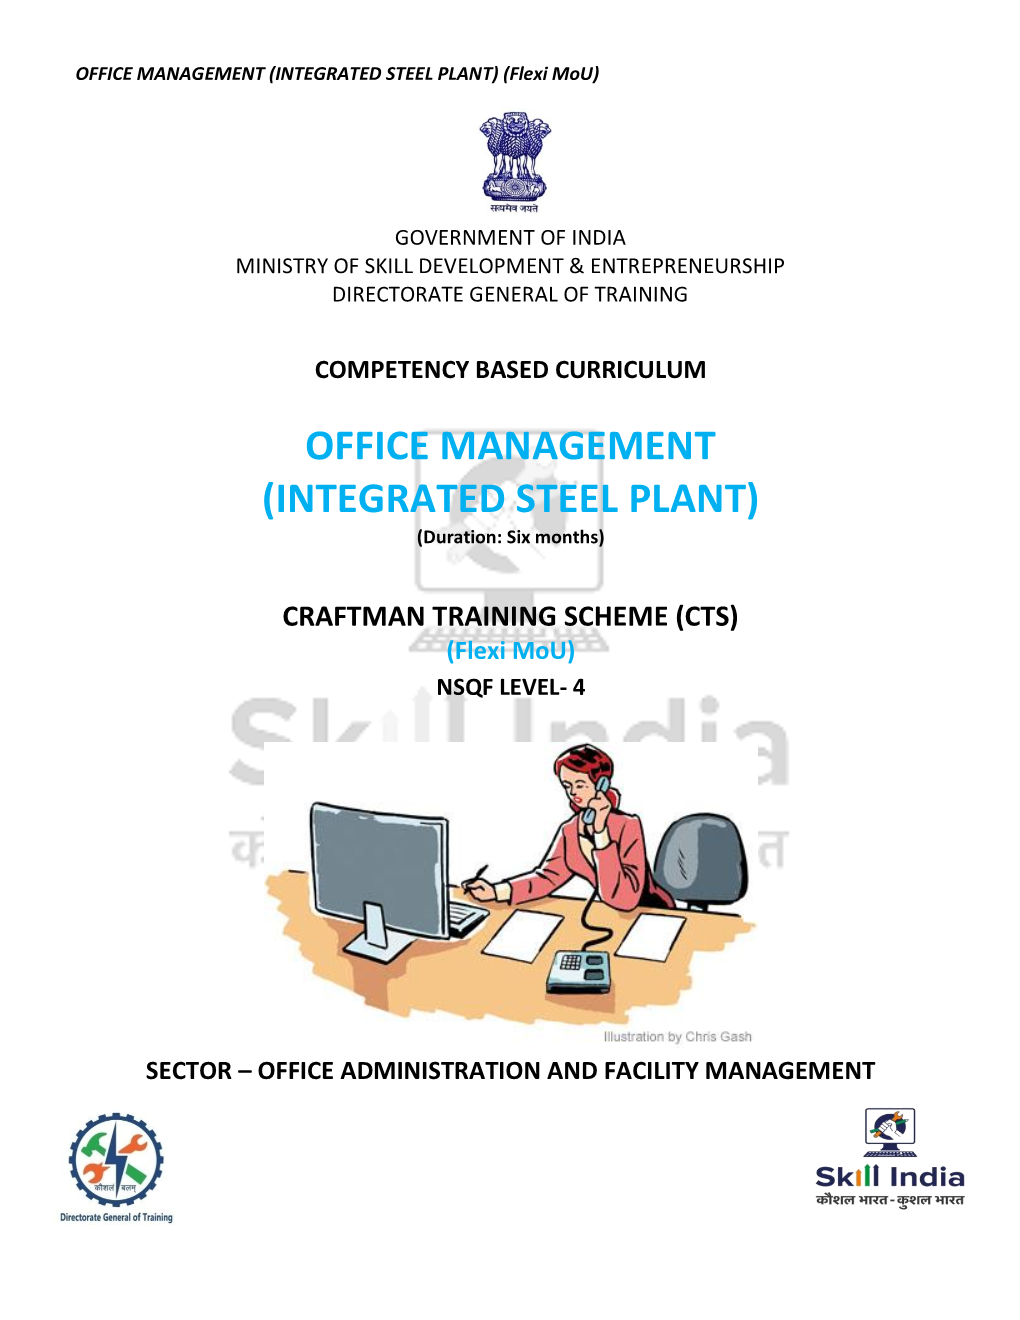 OFFICE MANAGEMENT (INTEGRATED STEEL PLANT) (Flexi Mou)